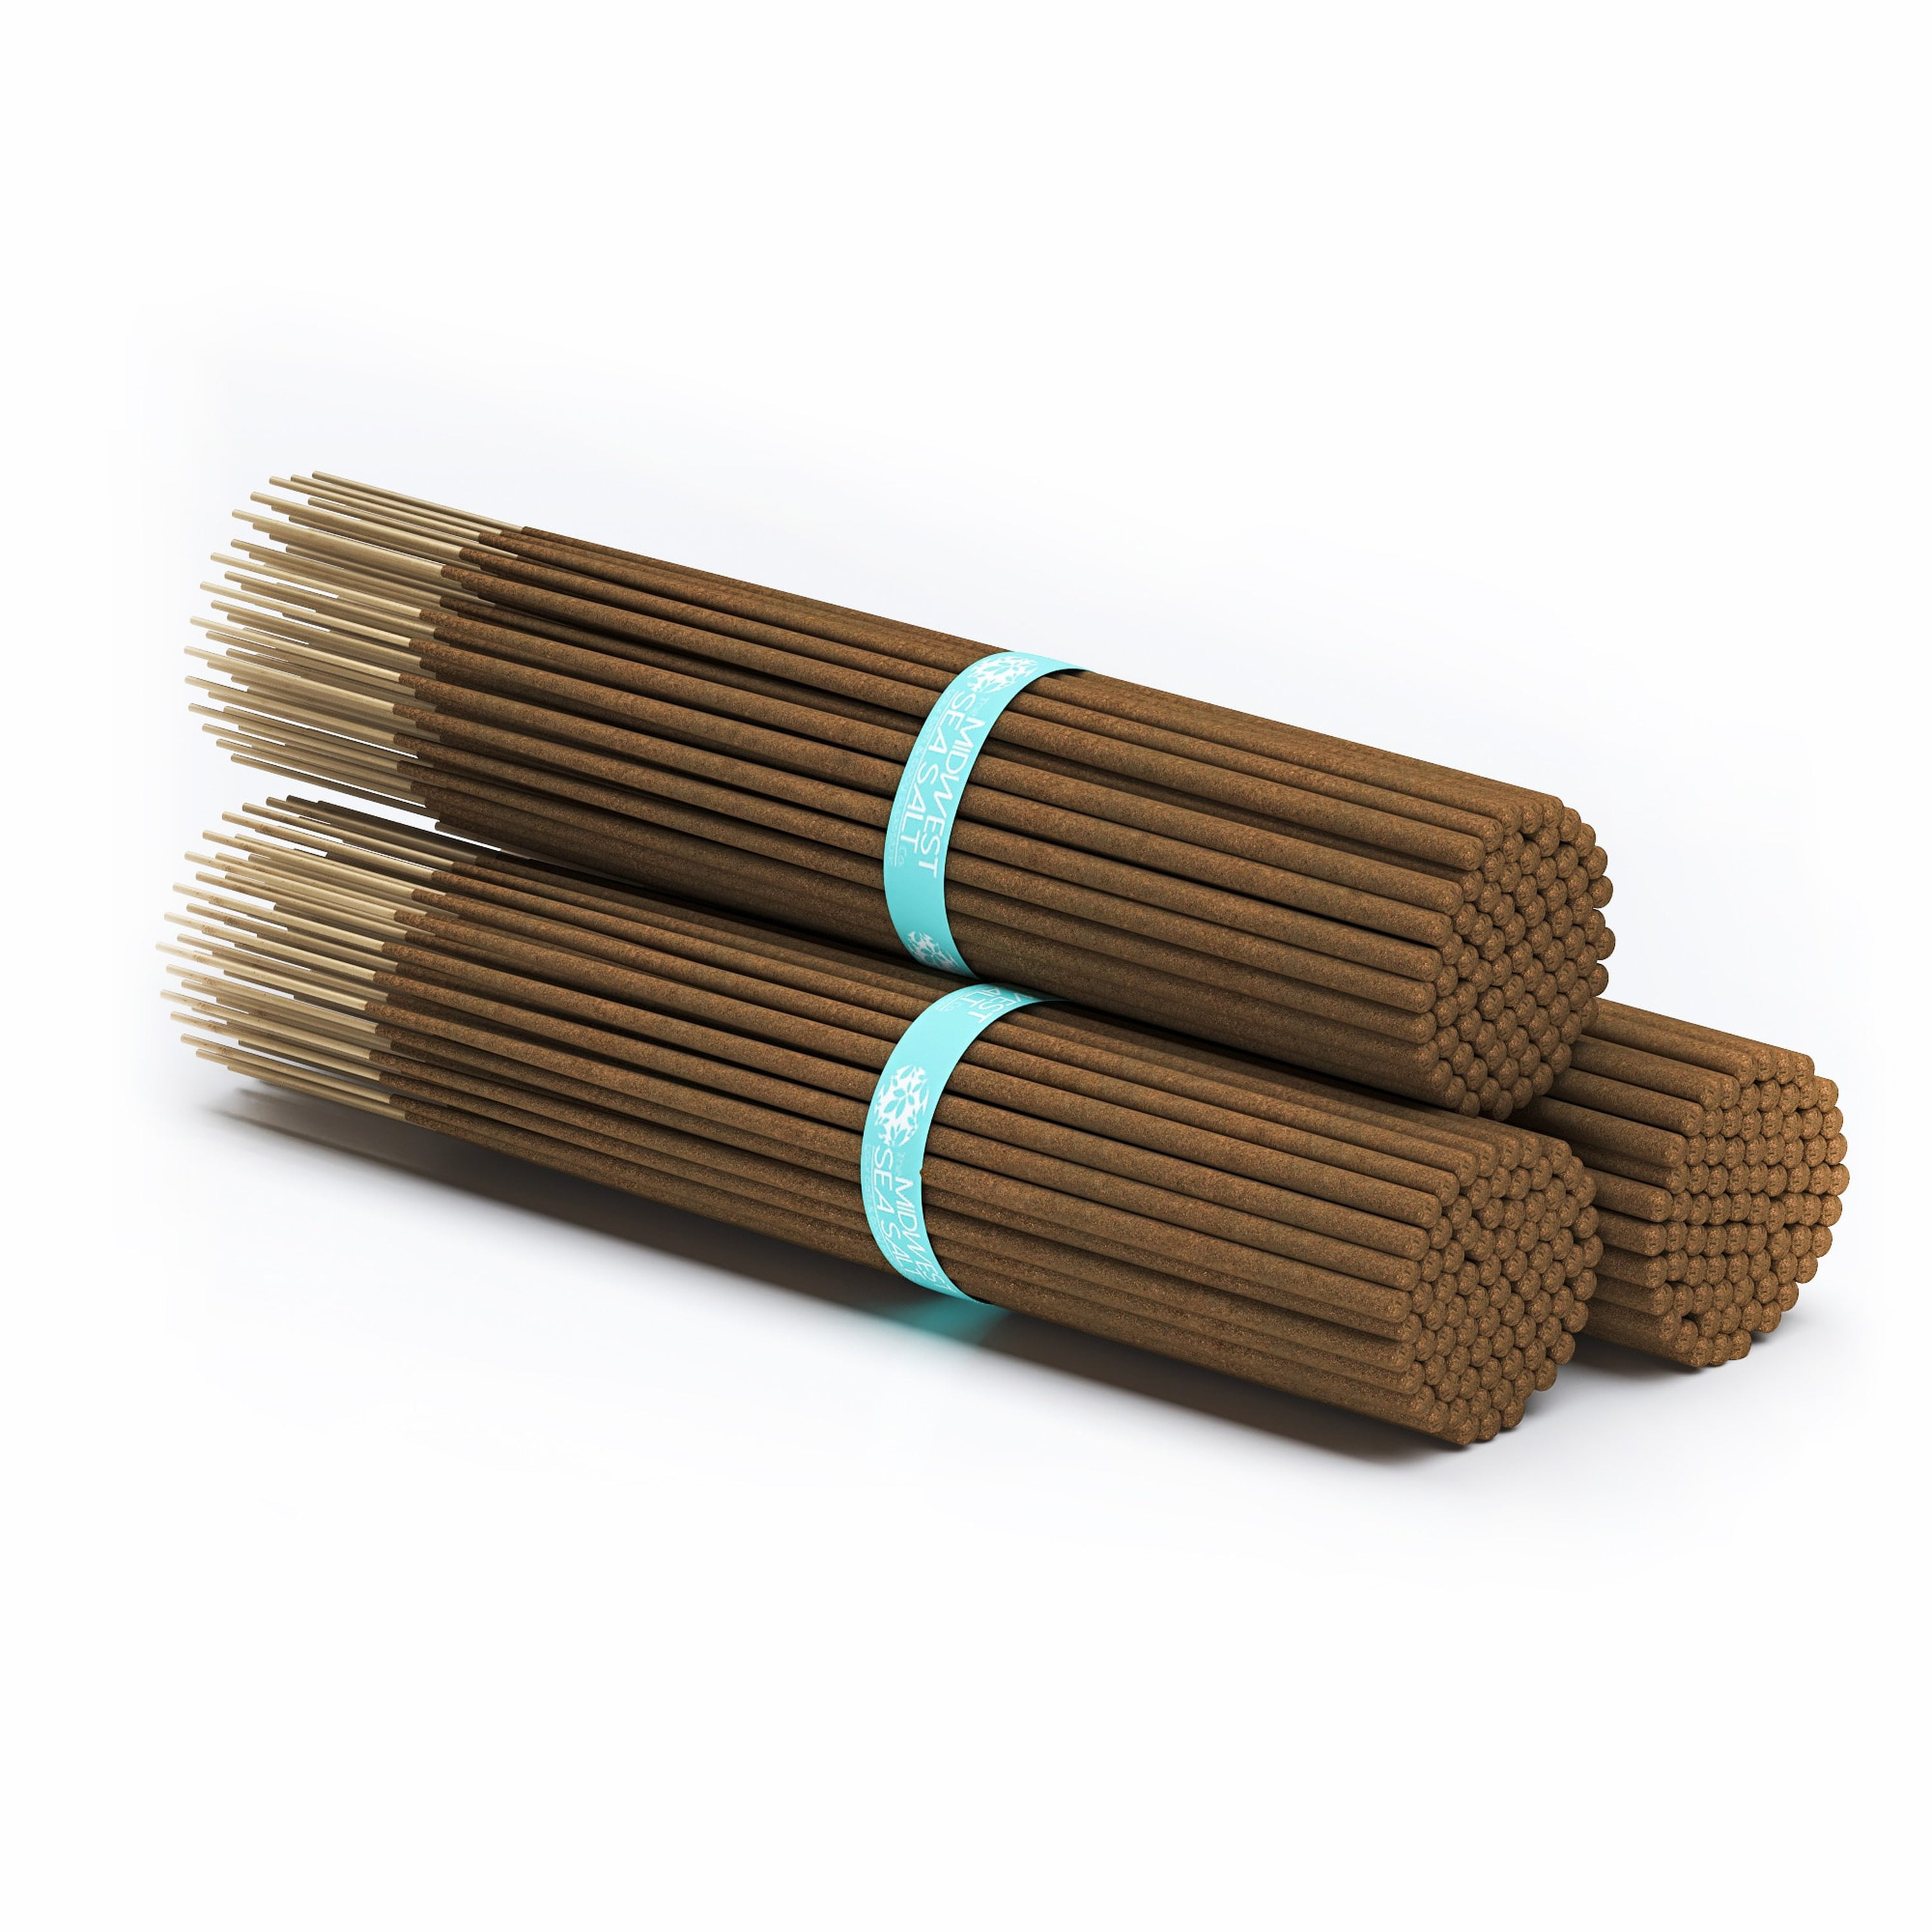 4 Boxes of Sweetgrass and Cedar Luxury Incense Sticks 